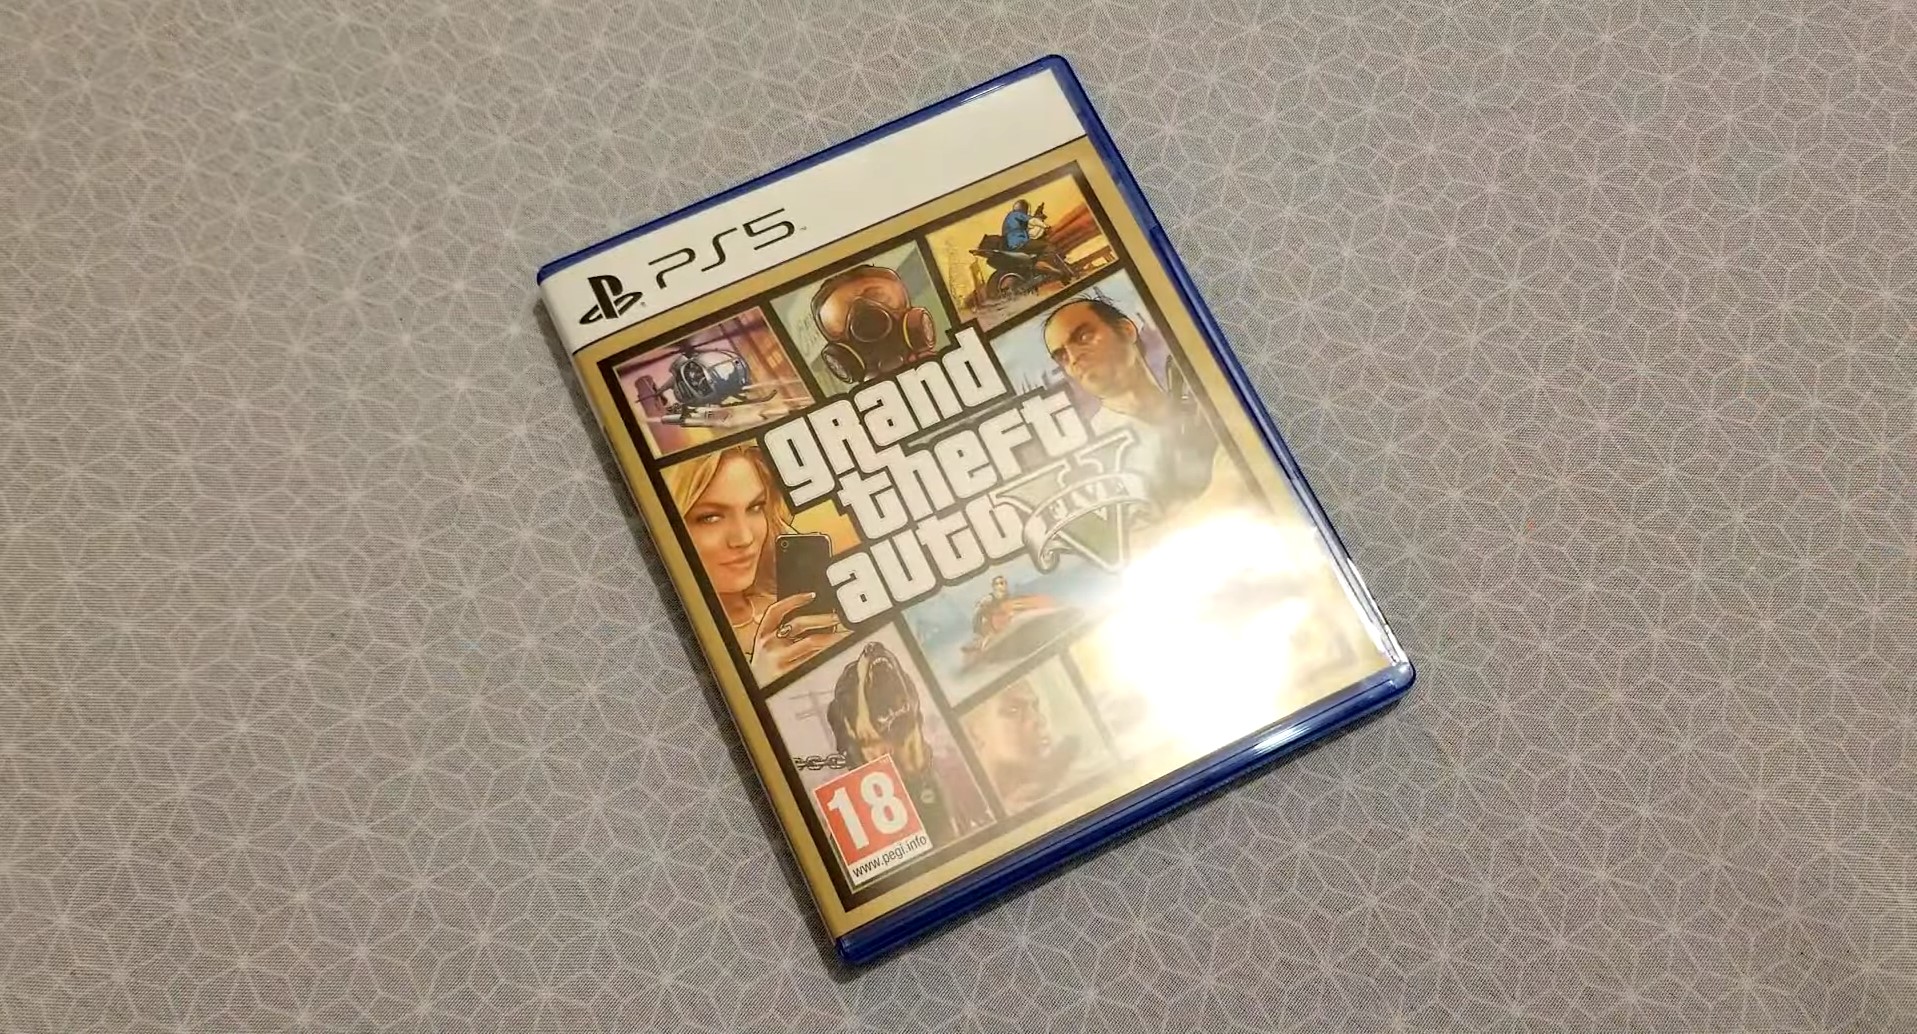 GTA 5 Disc frontside PS5 physical edition